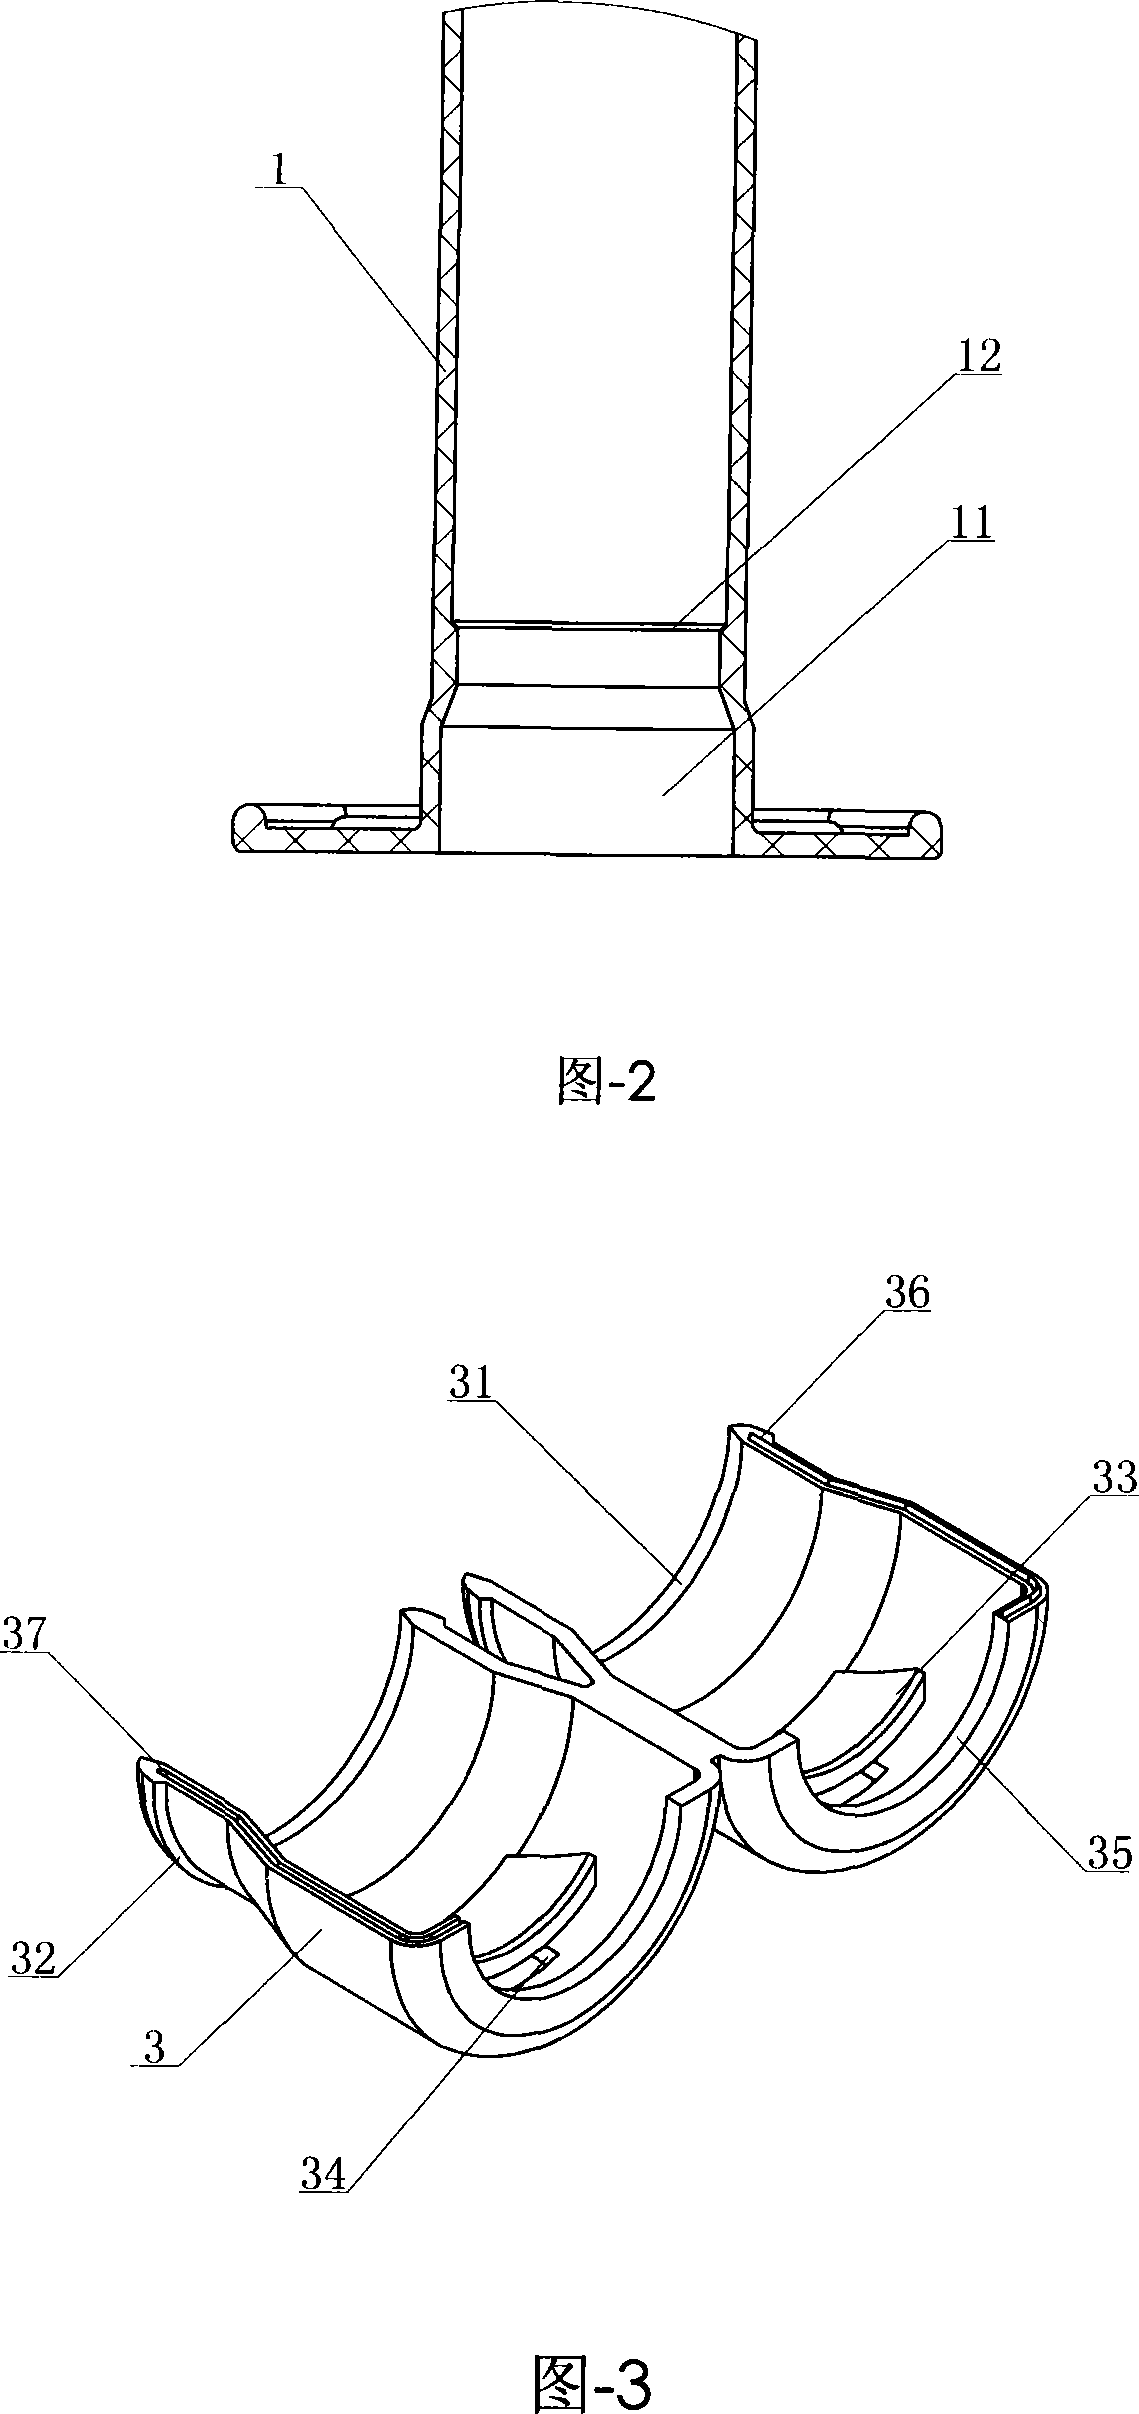 Safety injector core bar lockup device